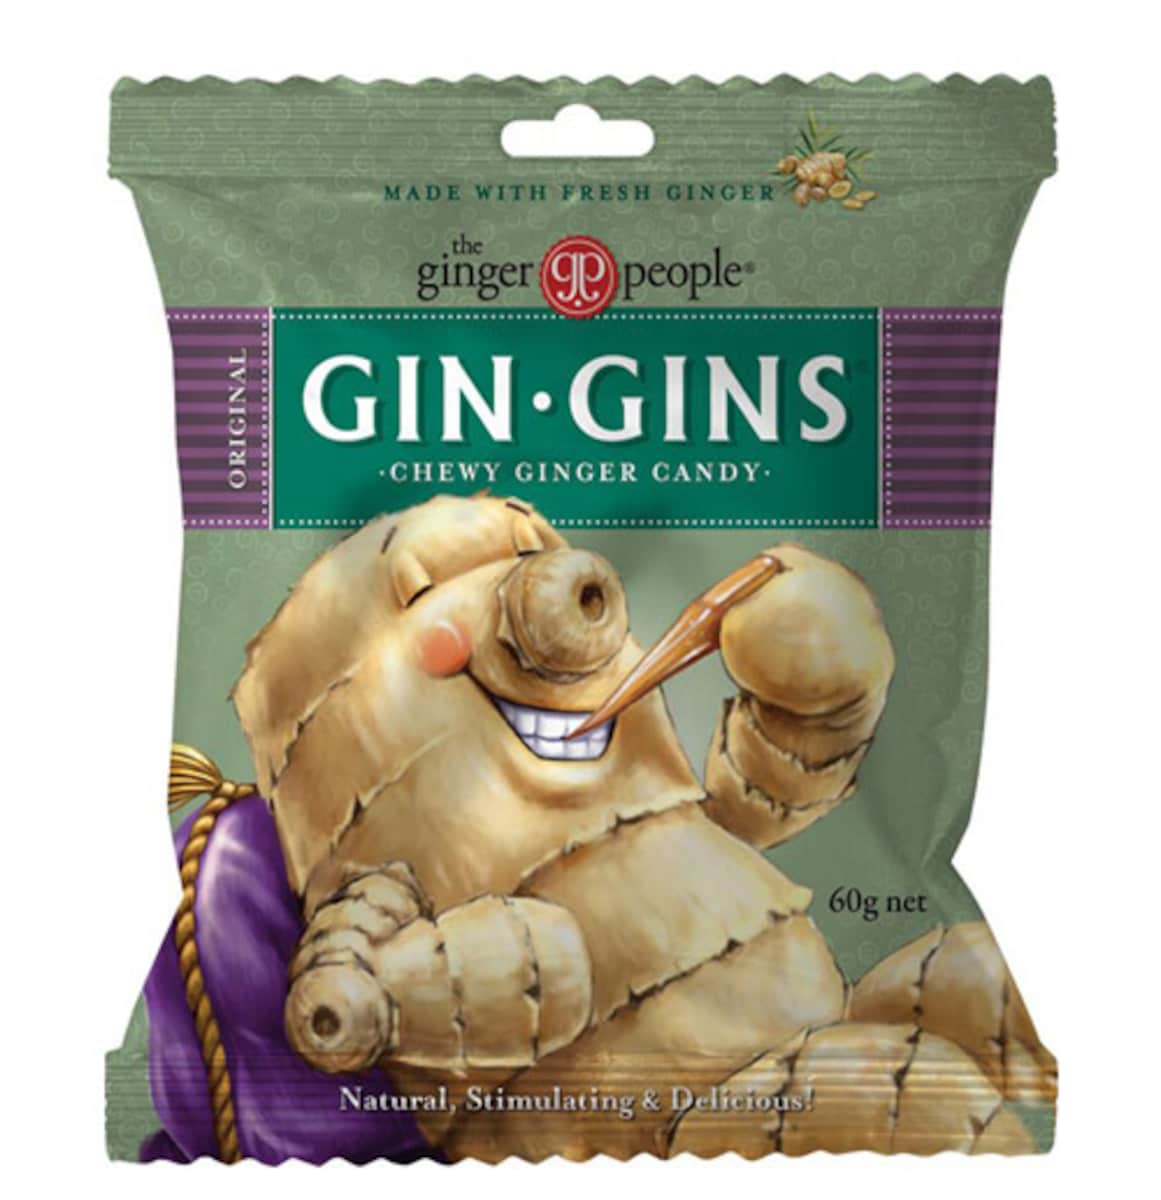 The Ginger People Gin Gins Ginger Candy Bag Chewy Original 60G